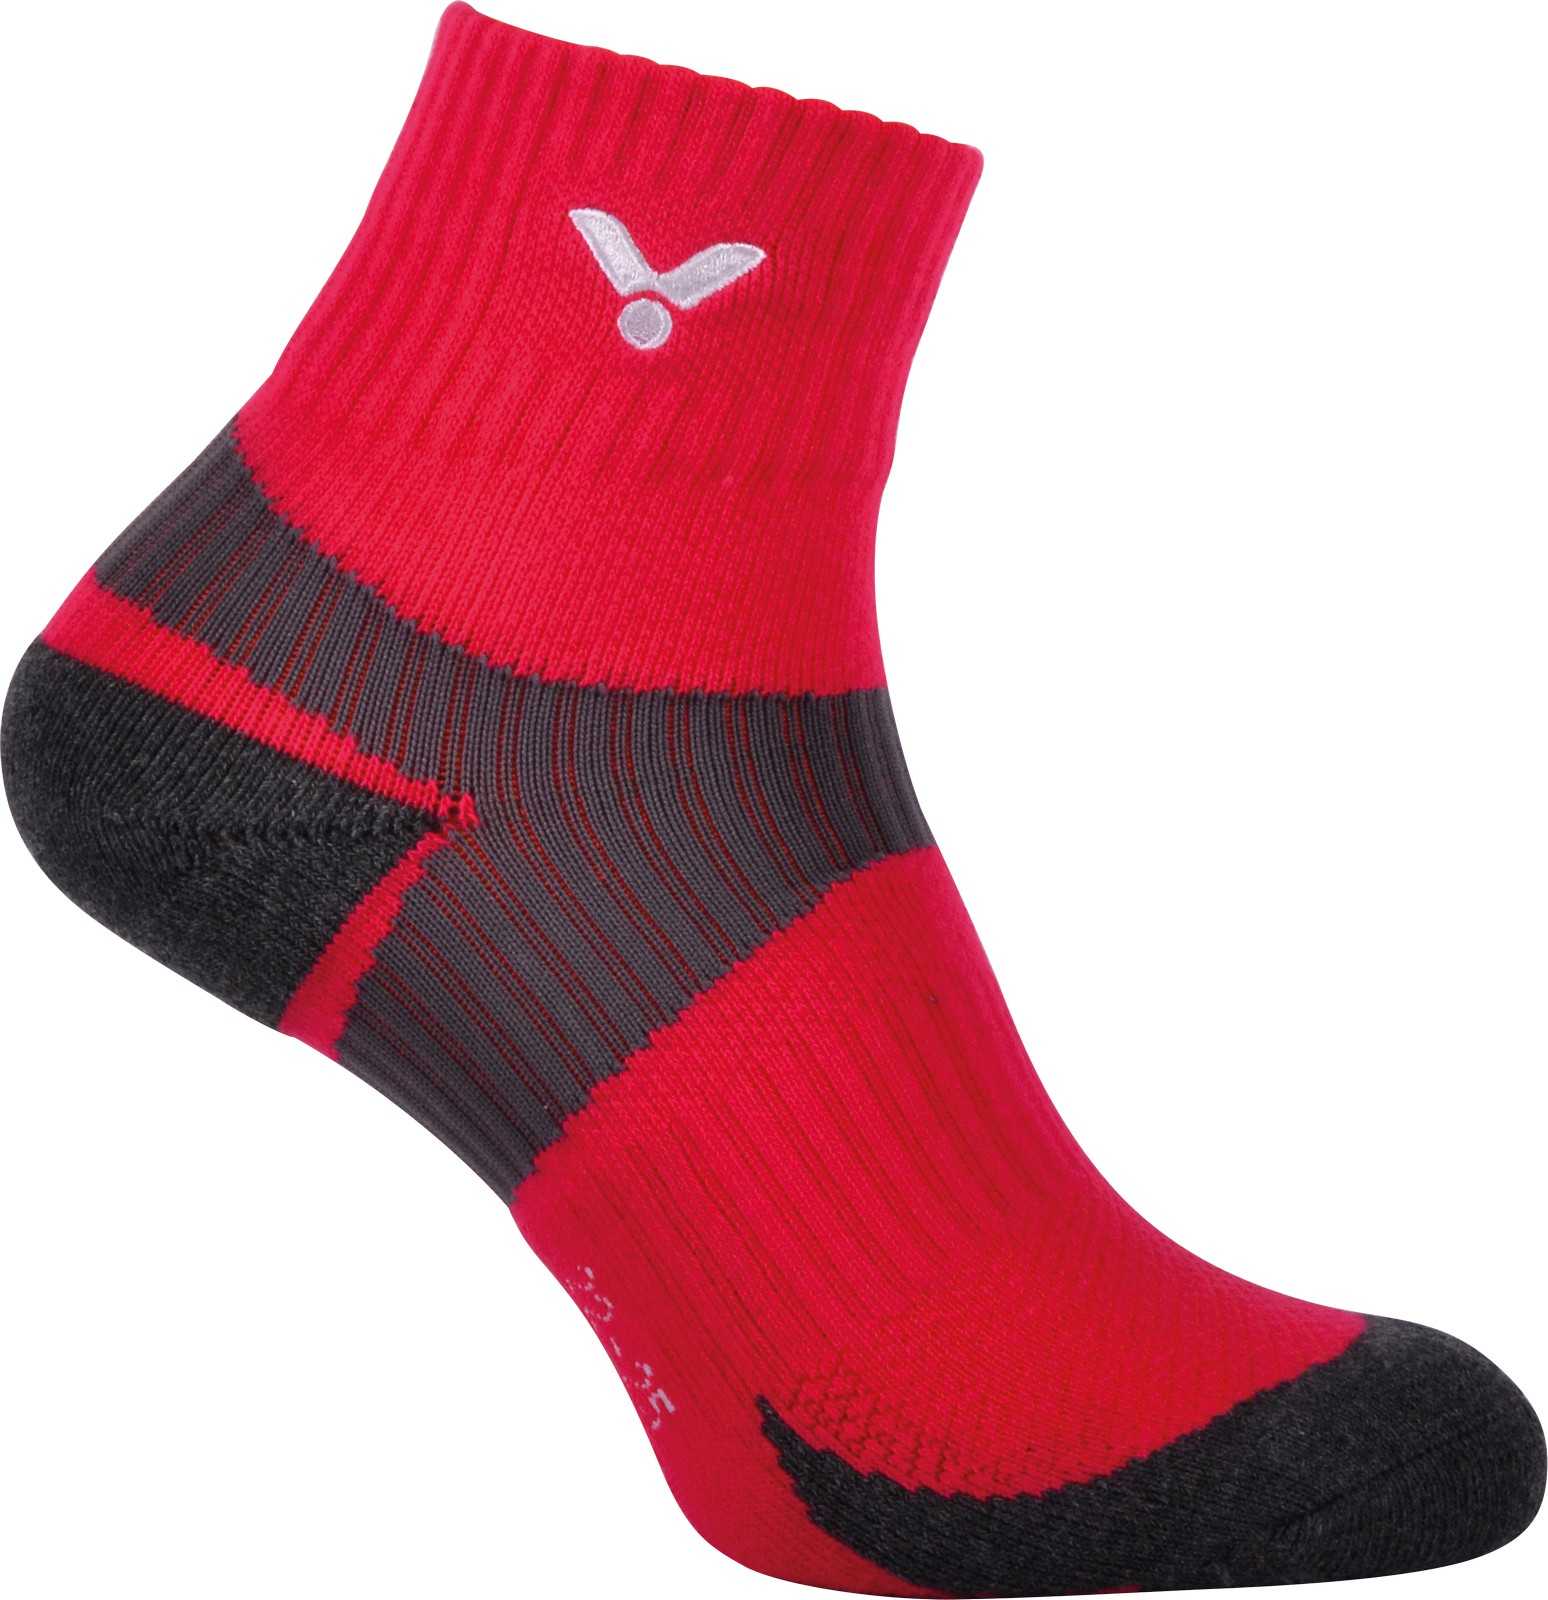 CHAUSSETTES VICTOR SK 239 PINK